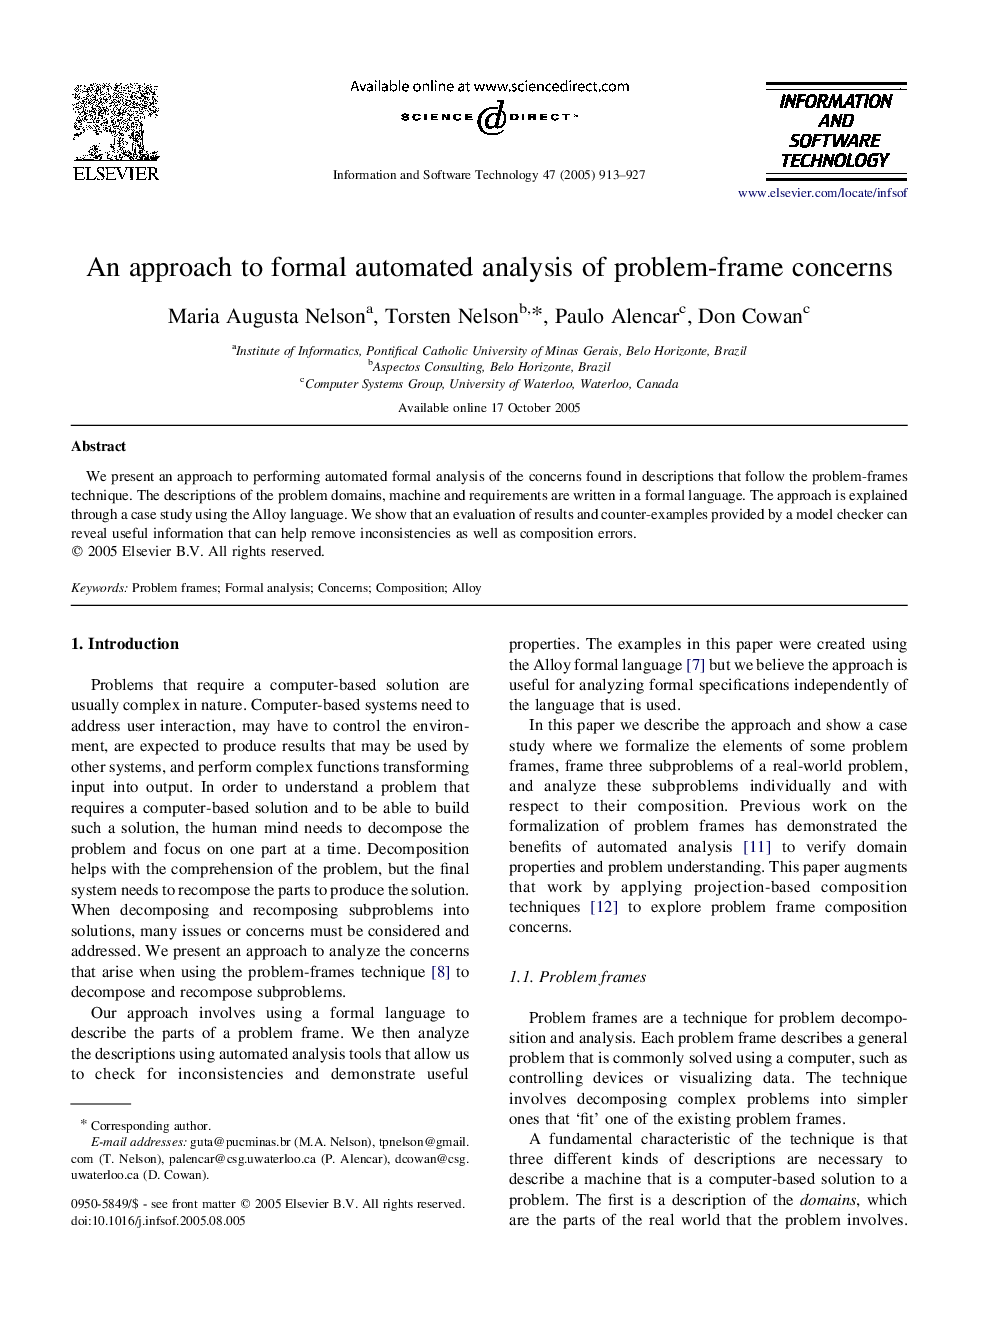 An approach to formal automated analysis of problem-frame concerns